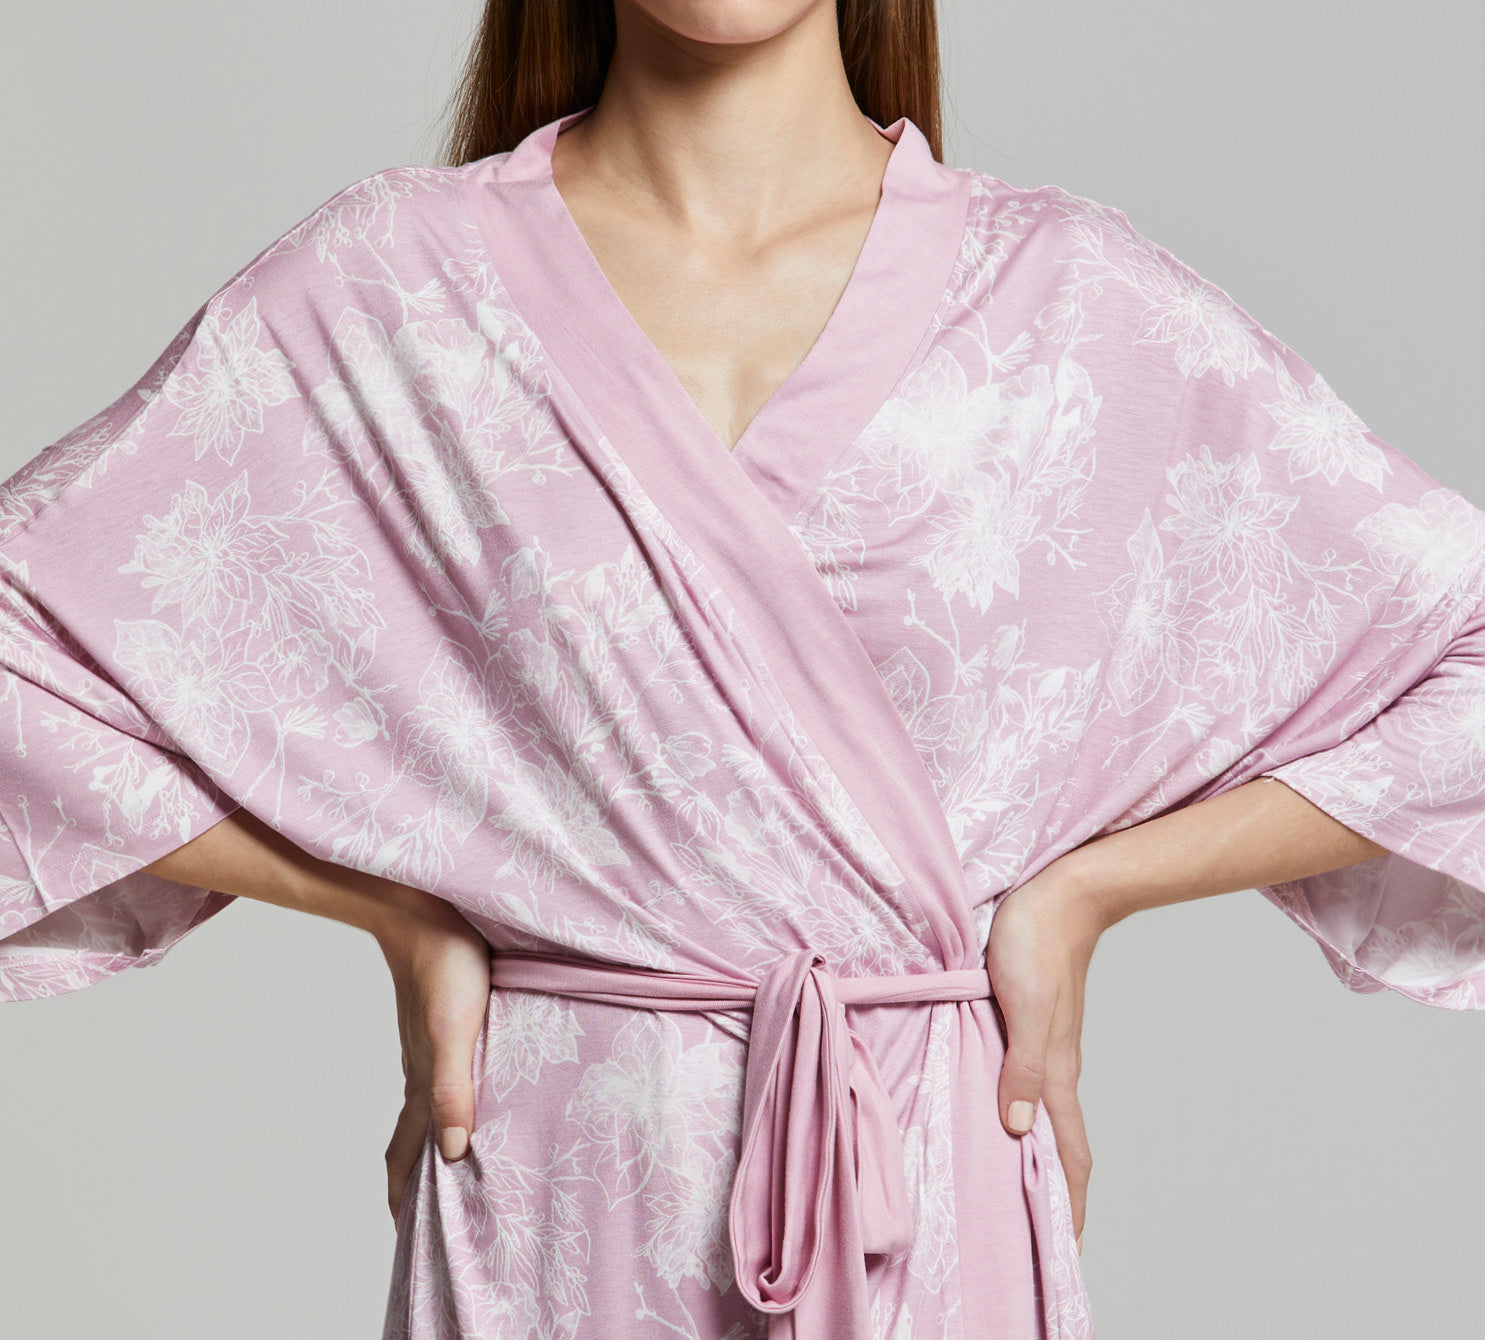 Loren dressing gown with floral print